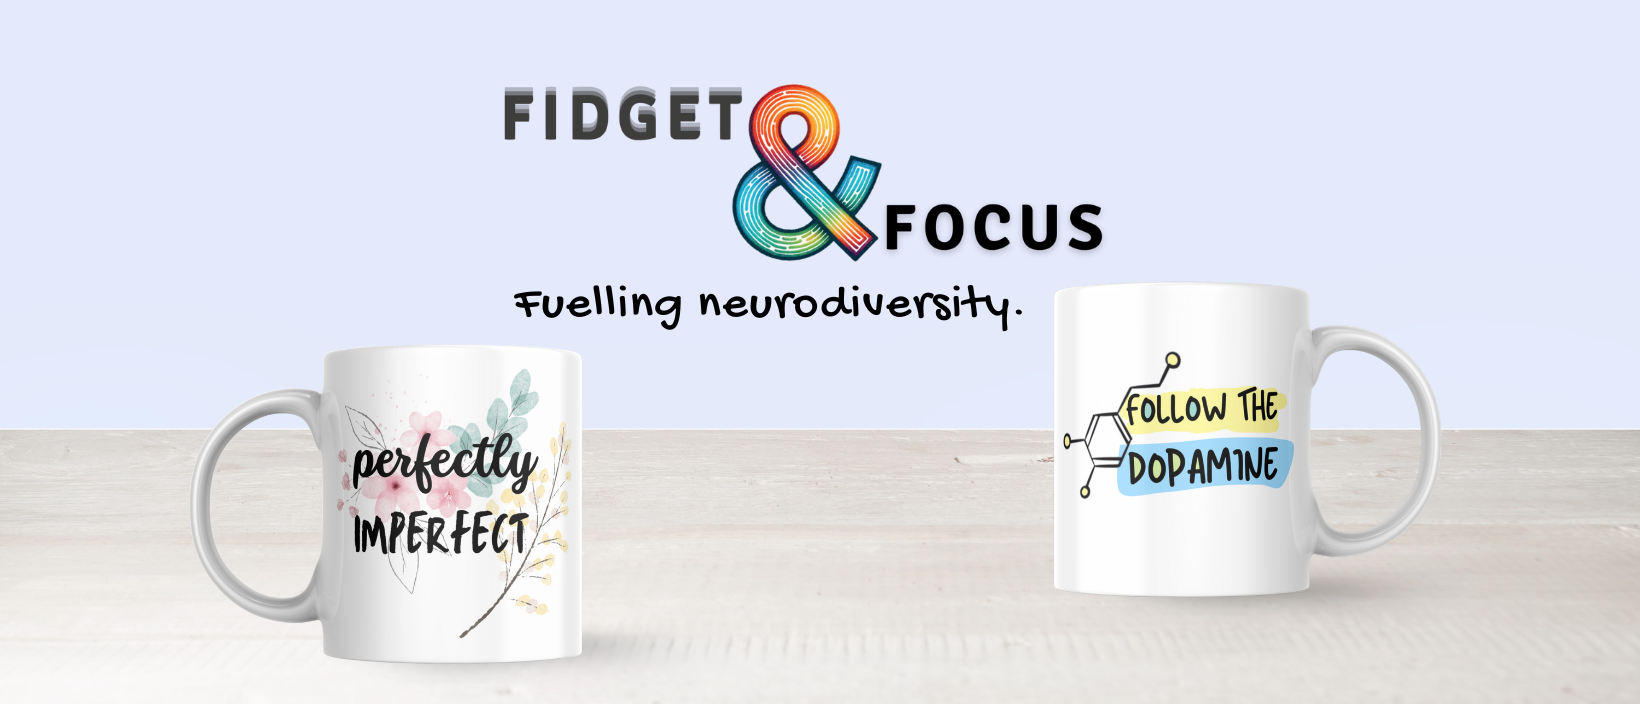 Fidget and Focus Banner - Perfectly Imperfect mug 